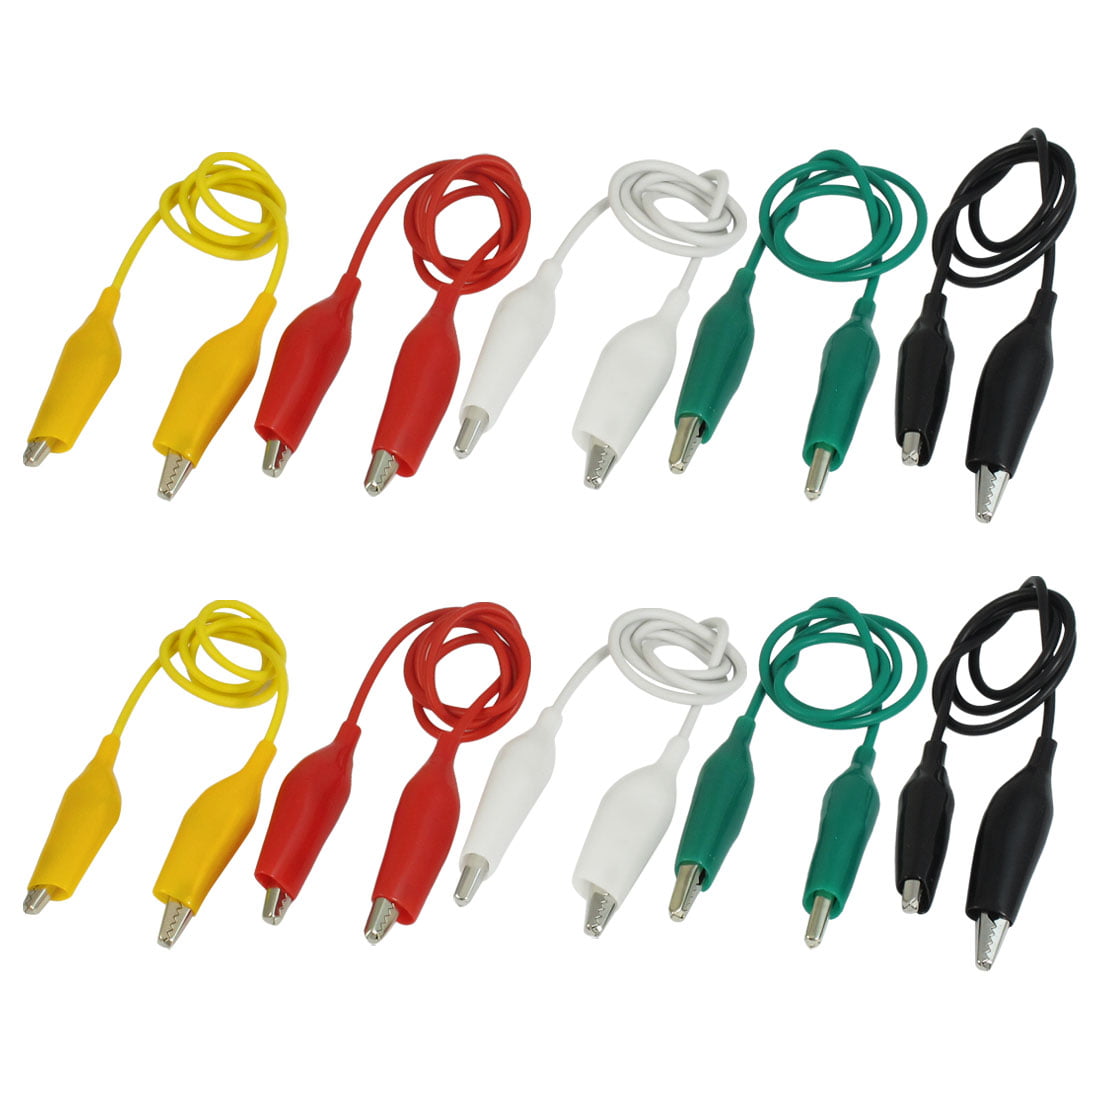 Details about   10pc Metered Colored Insulating Test Lead Cable Set Double Ended Alligator Clips 